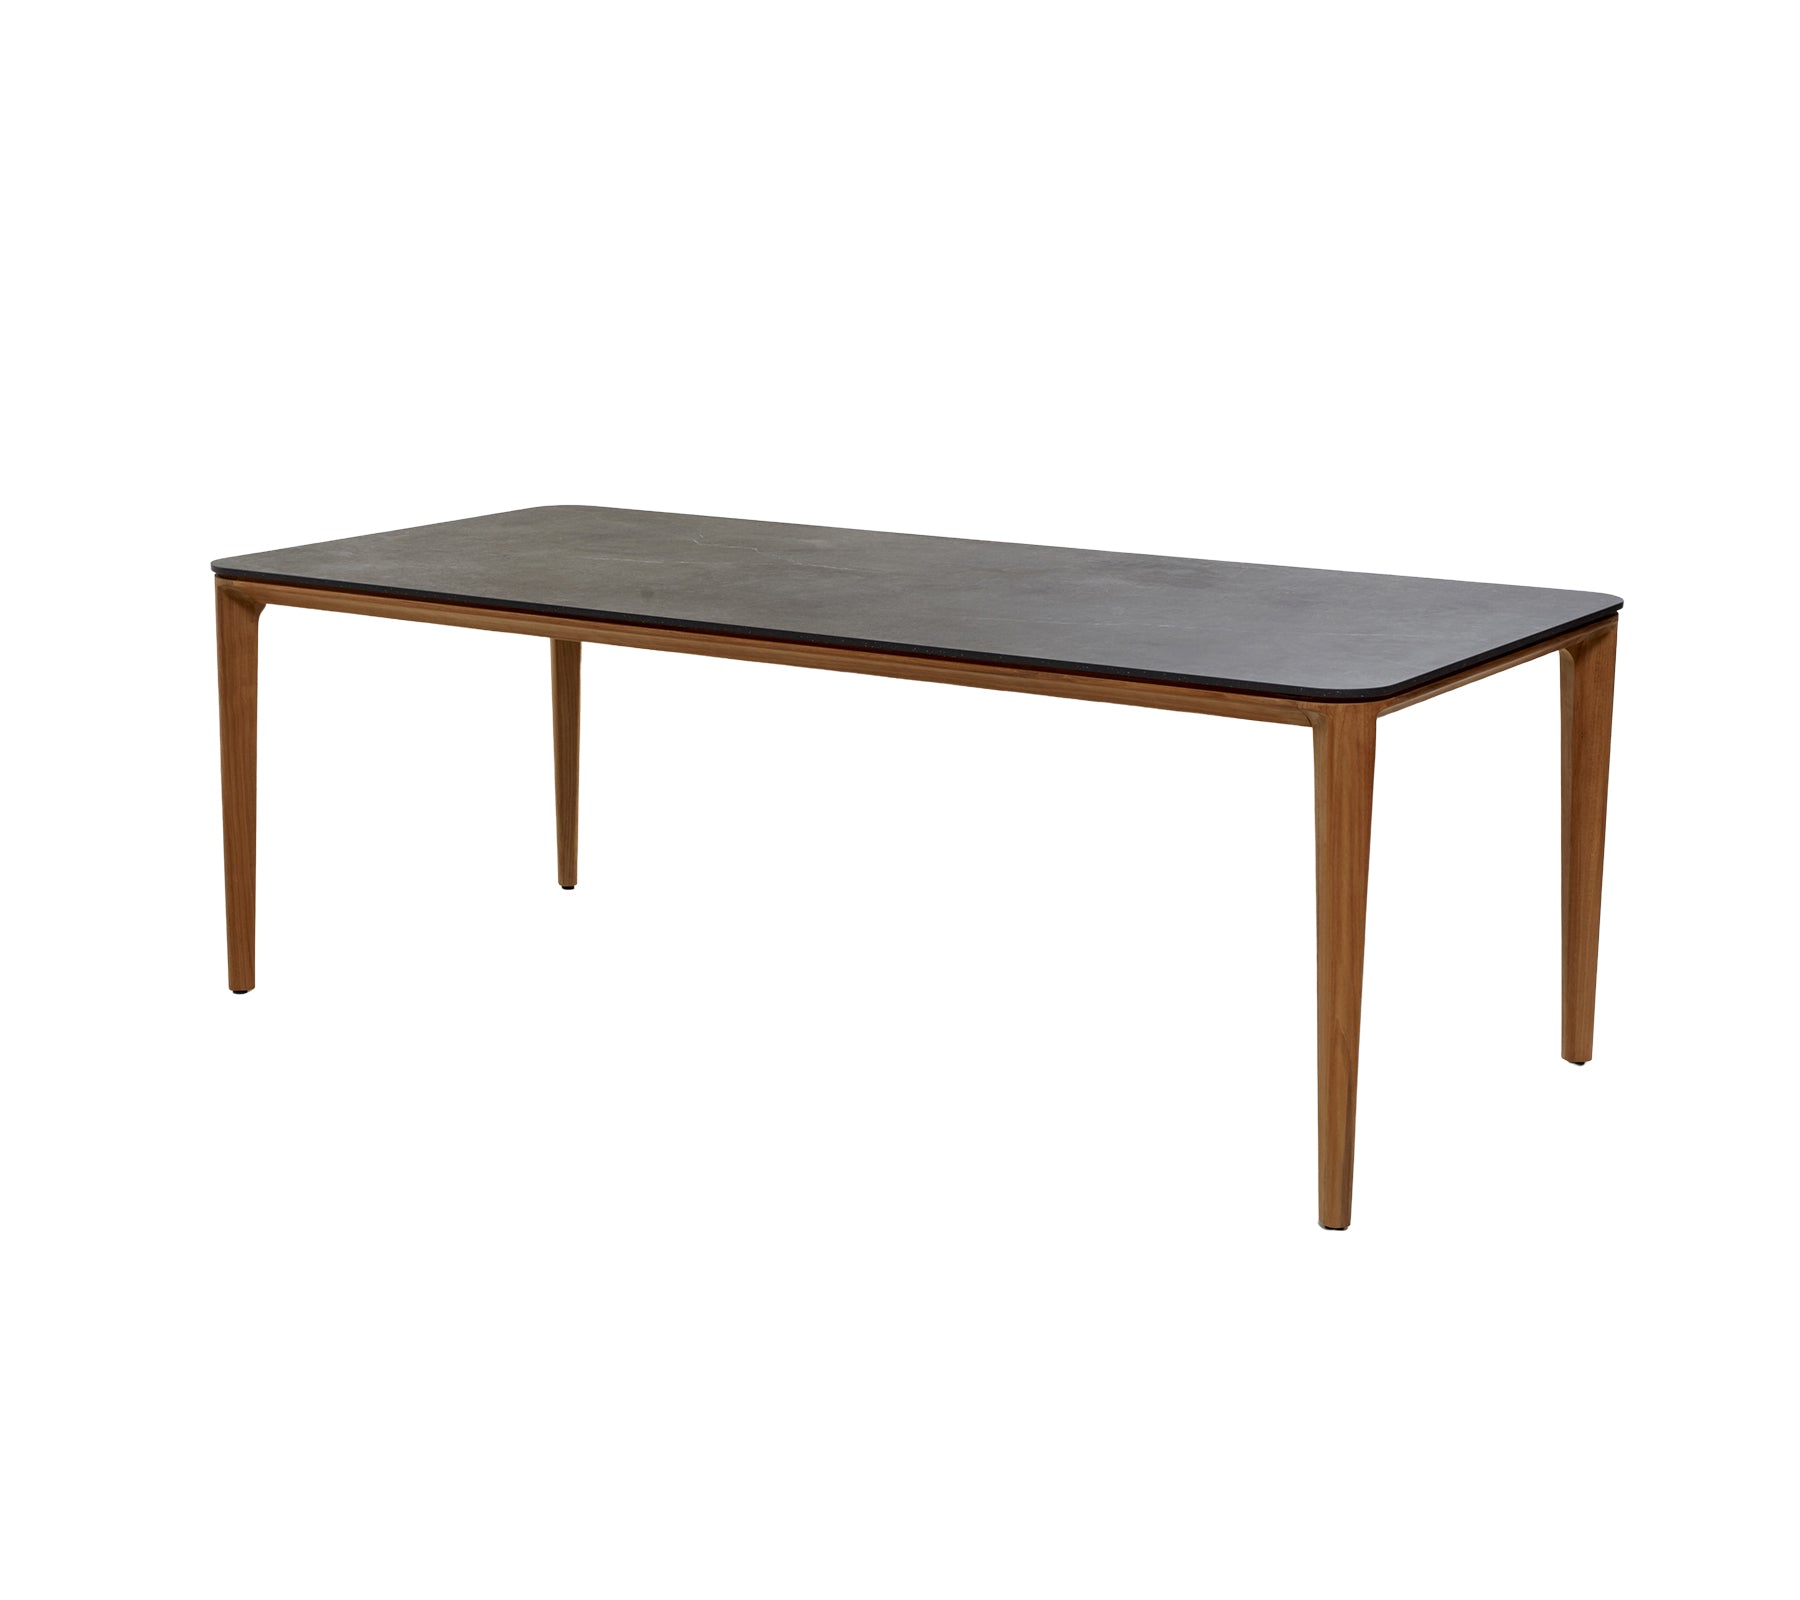 Cane-line Aspect Dining Table, 210X100 Cm 50802T